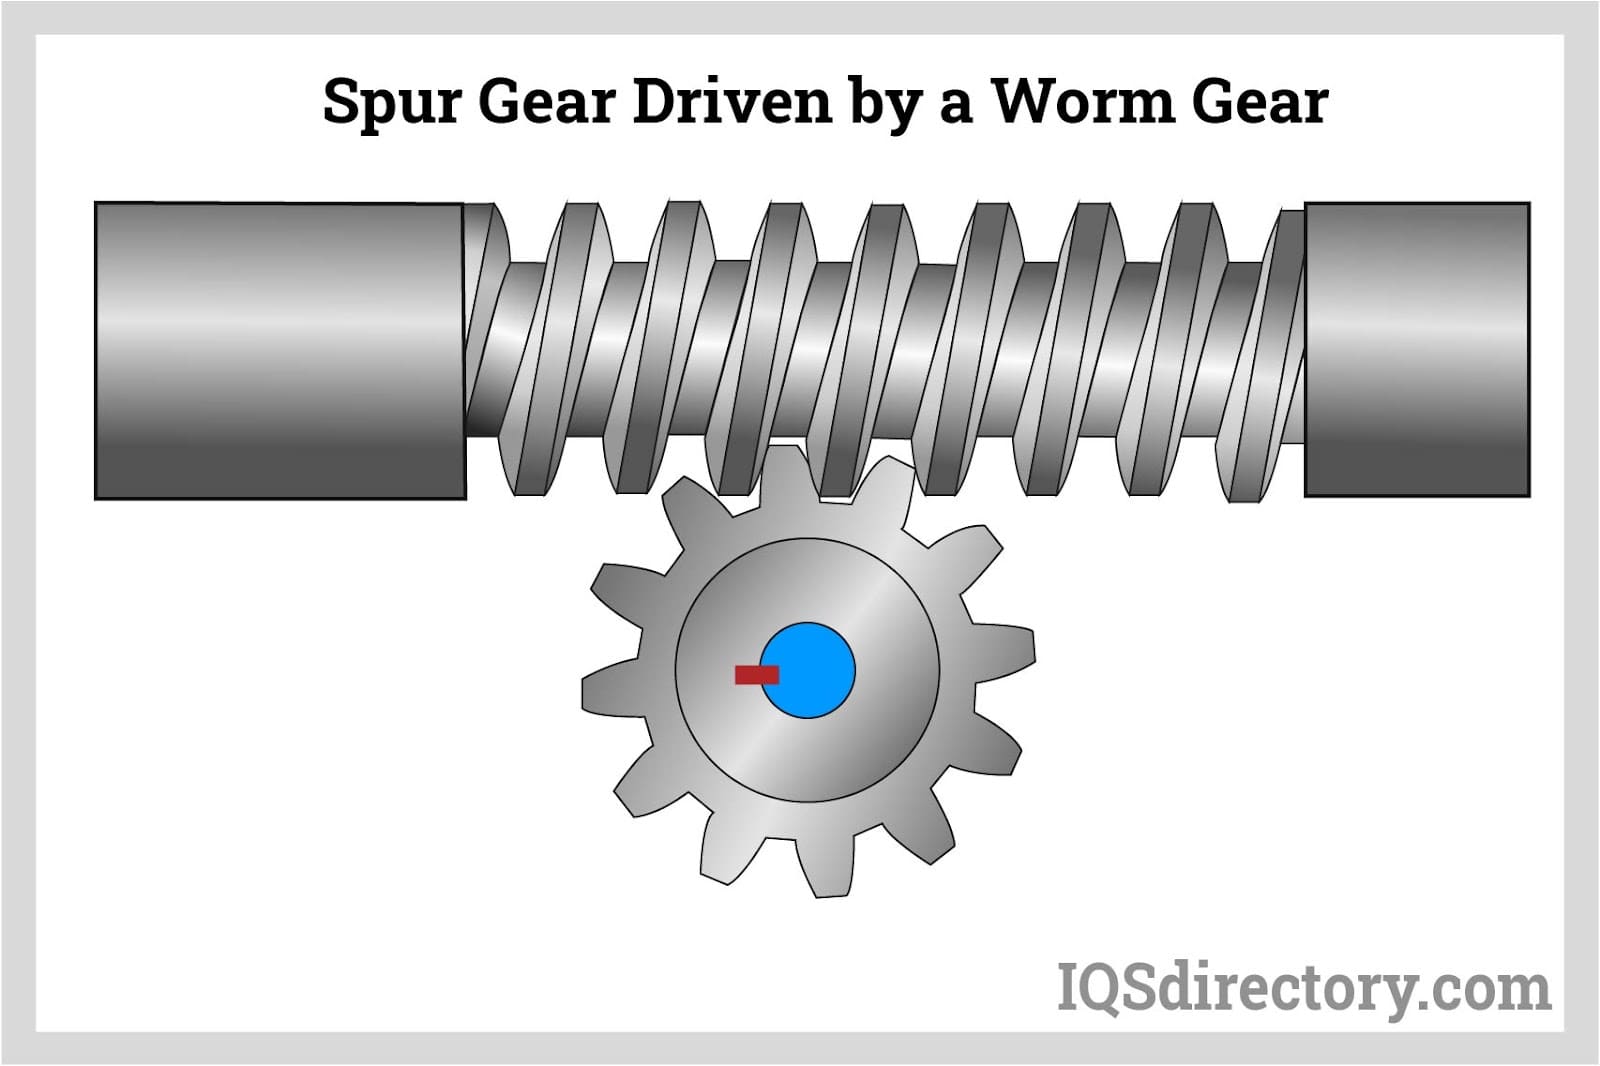 Spur Gear Driven by a Worm Gear